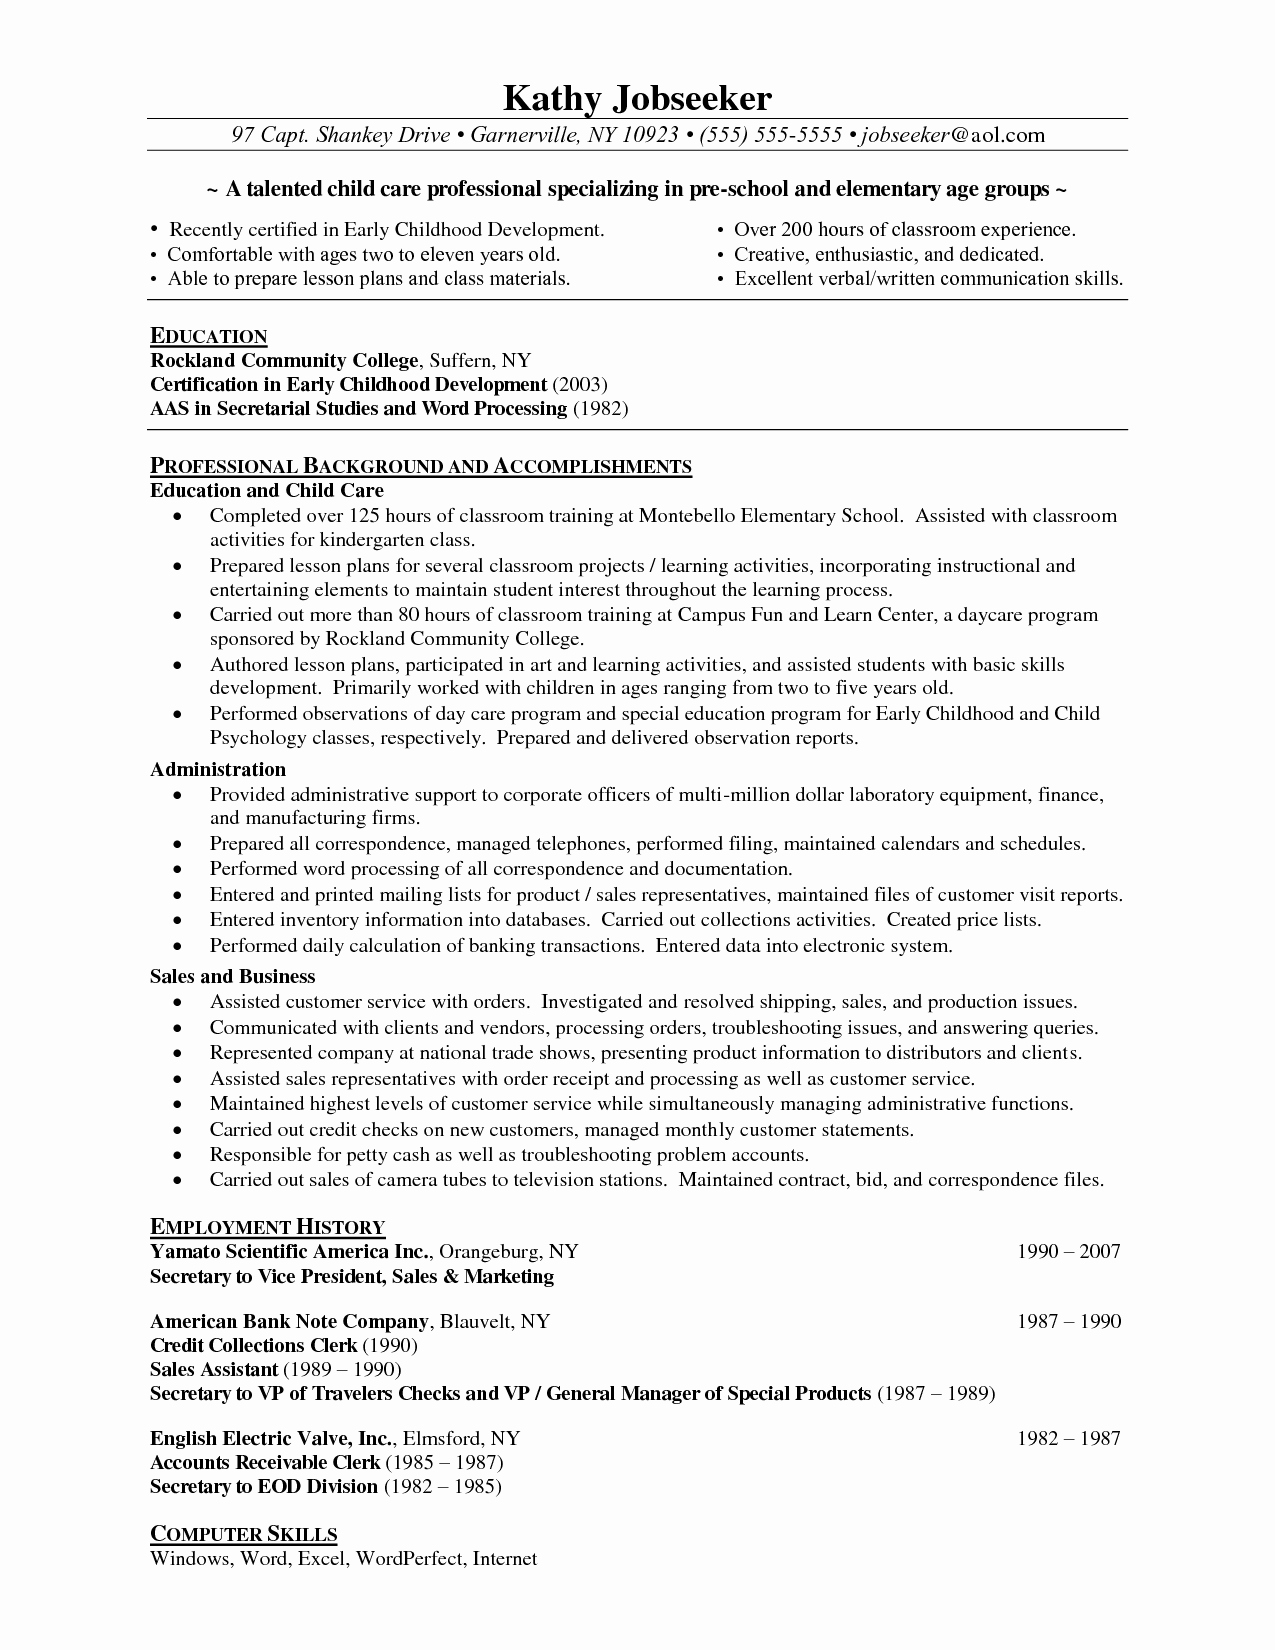 Preschool assistant Teacher Resume with No Experience